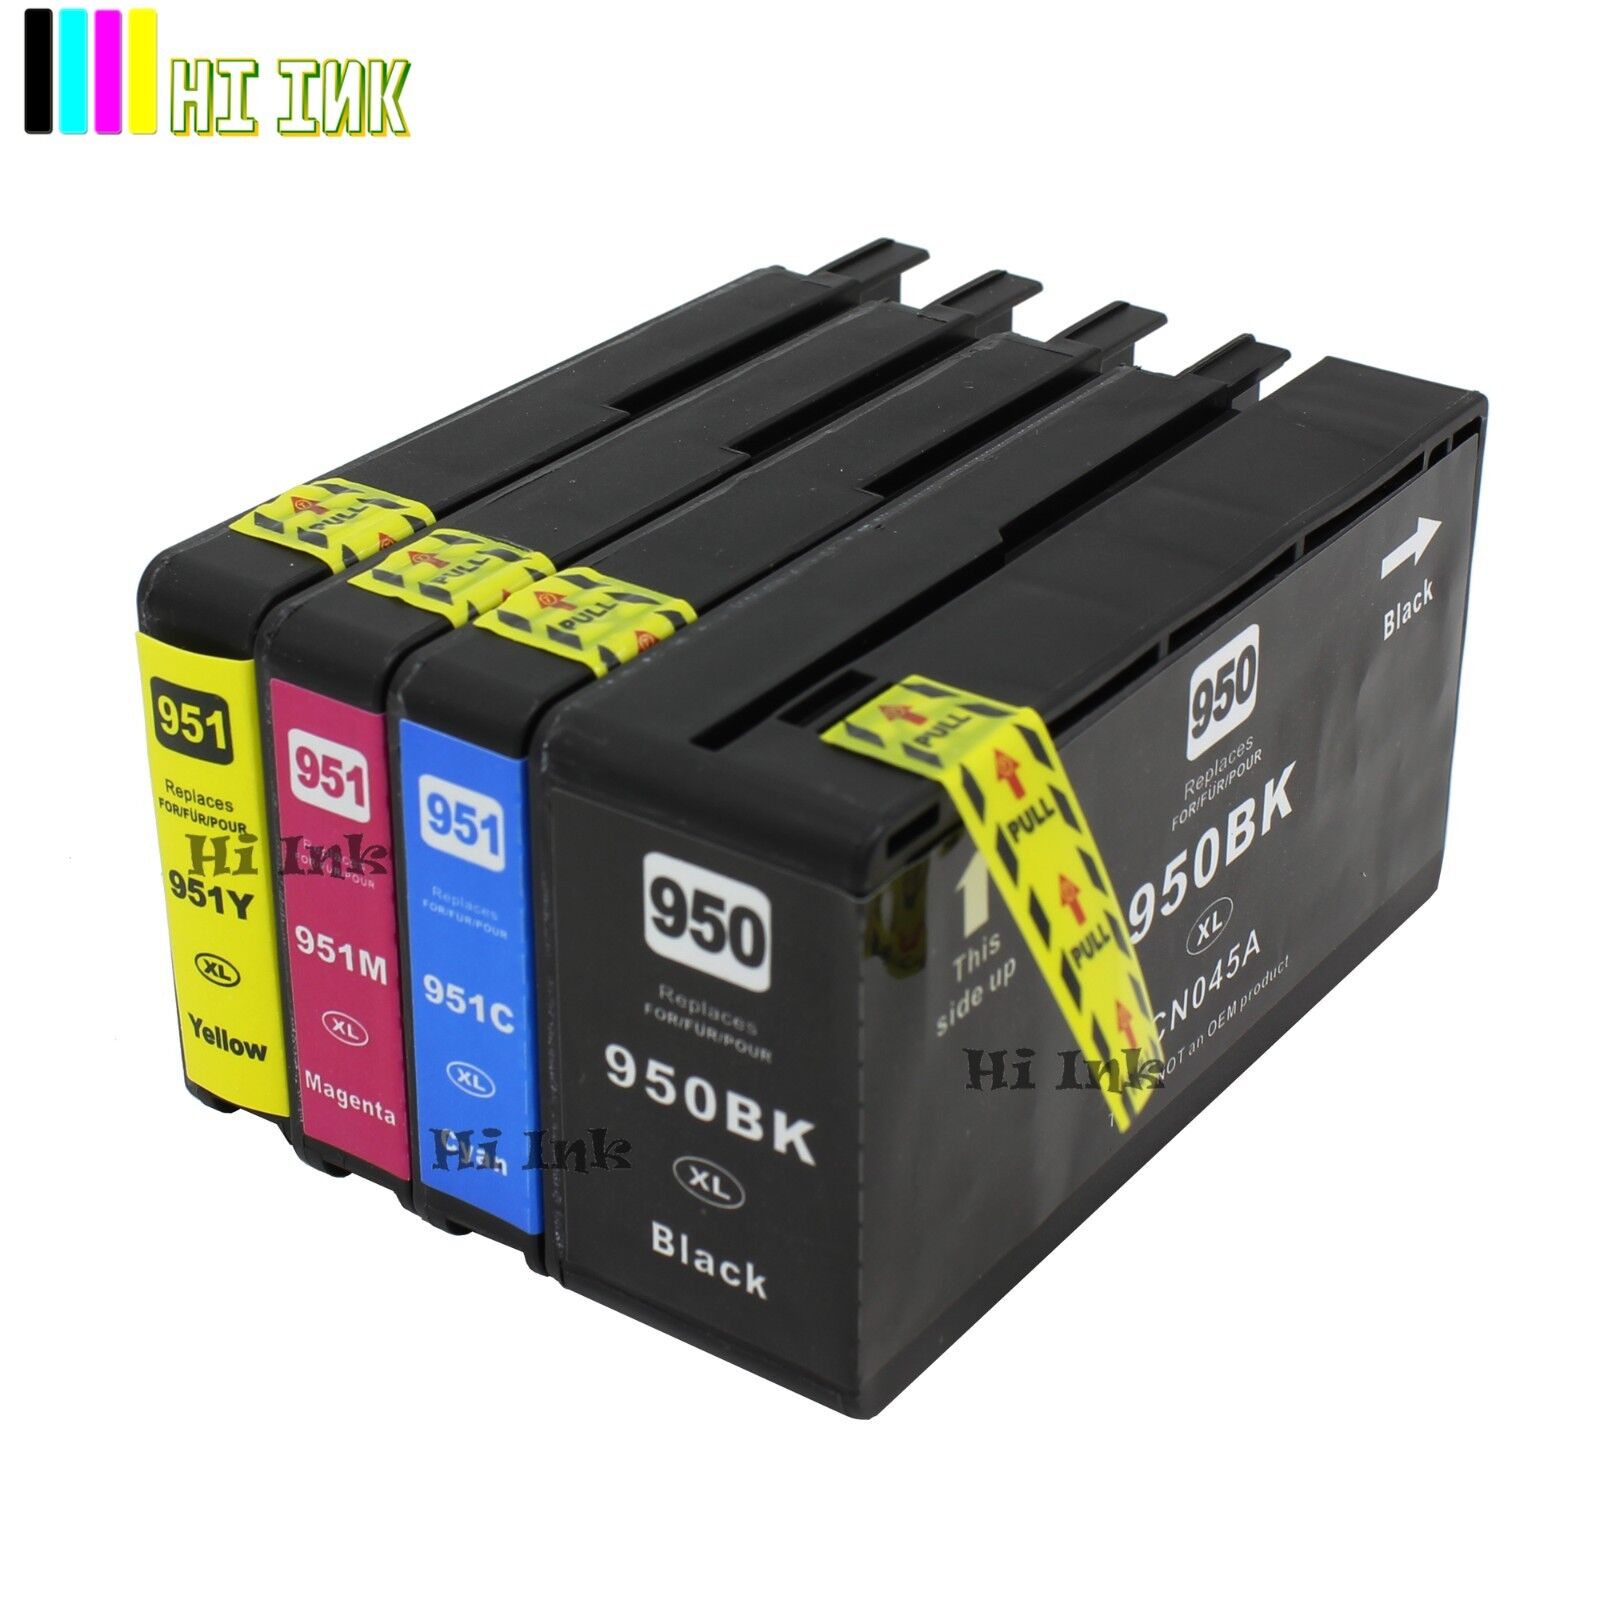 4PK Replacement ink for HP 950XL 951 XL OfficeJet Pro 8100 8600 8610 8620 8630